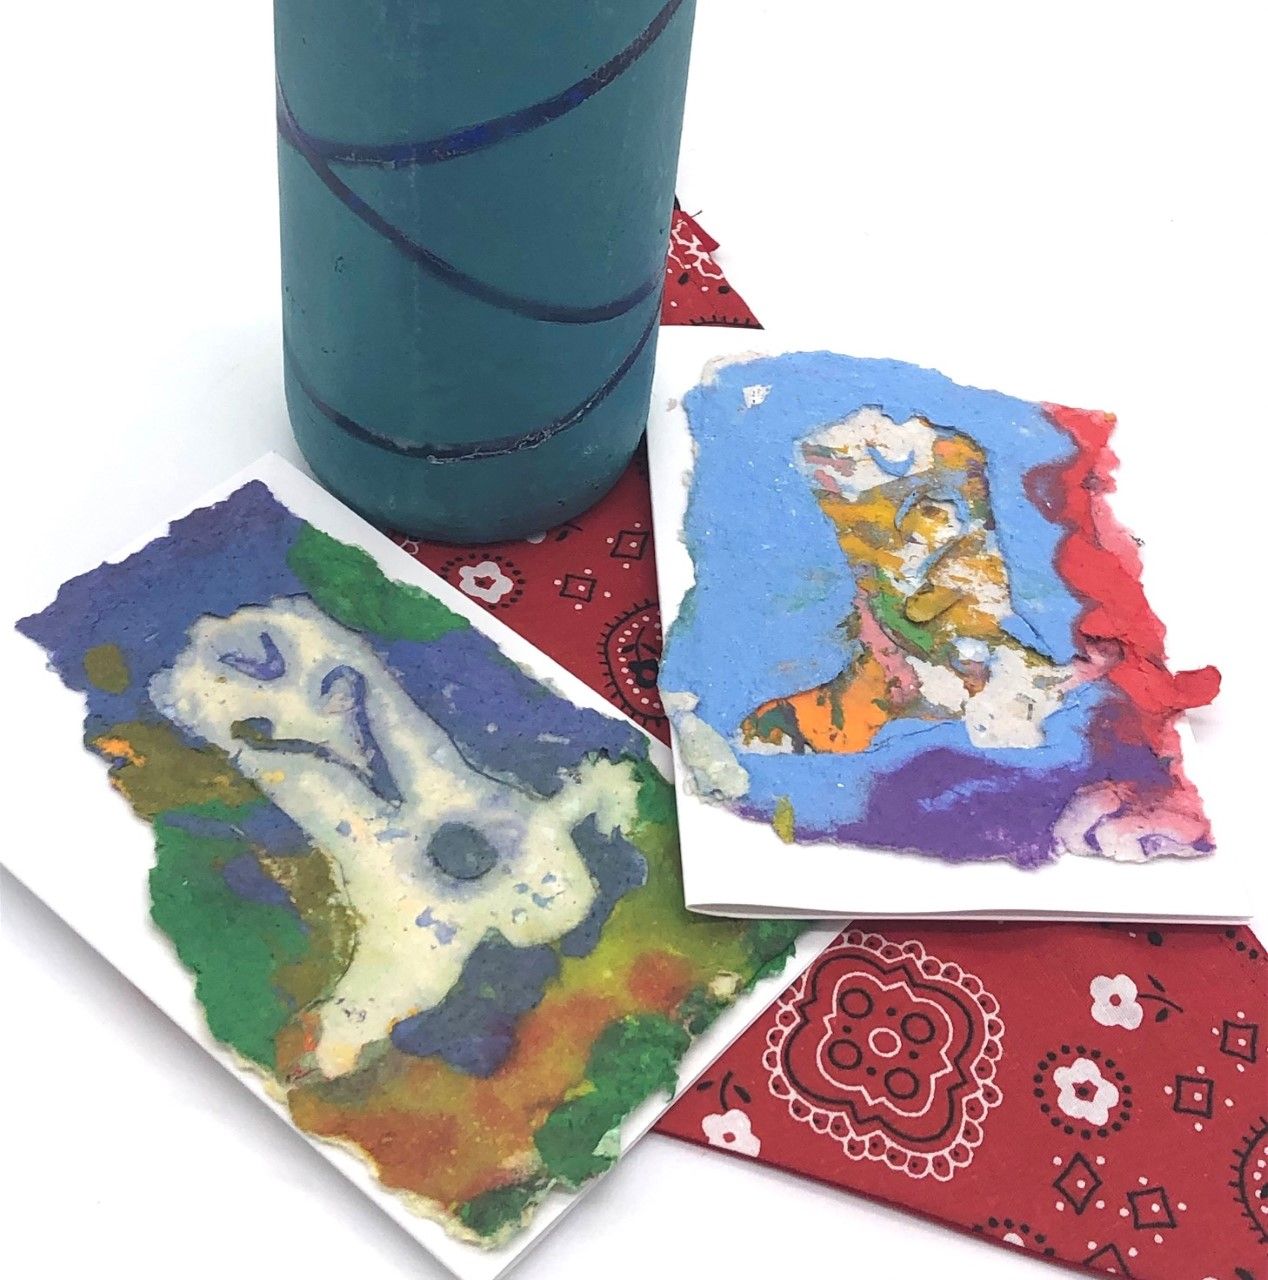 cards with pictures of cowboy boots made with handmade paper in vibrant colors sitting on top of a red bandana and a blue wine bottle in the background